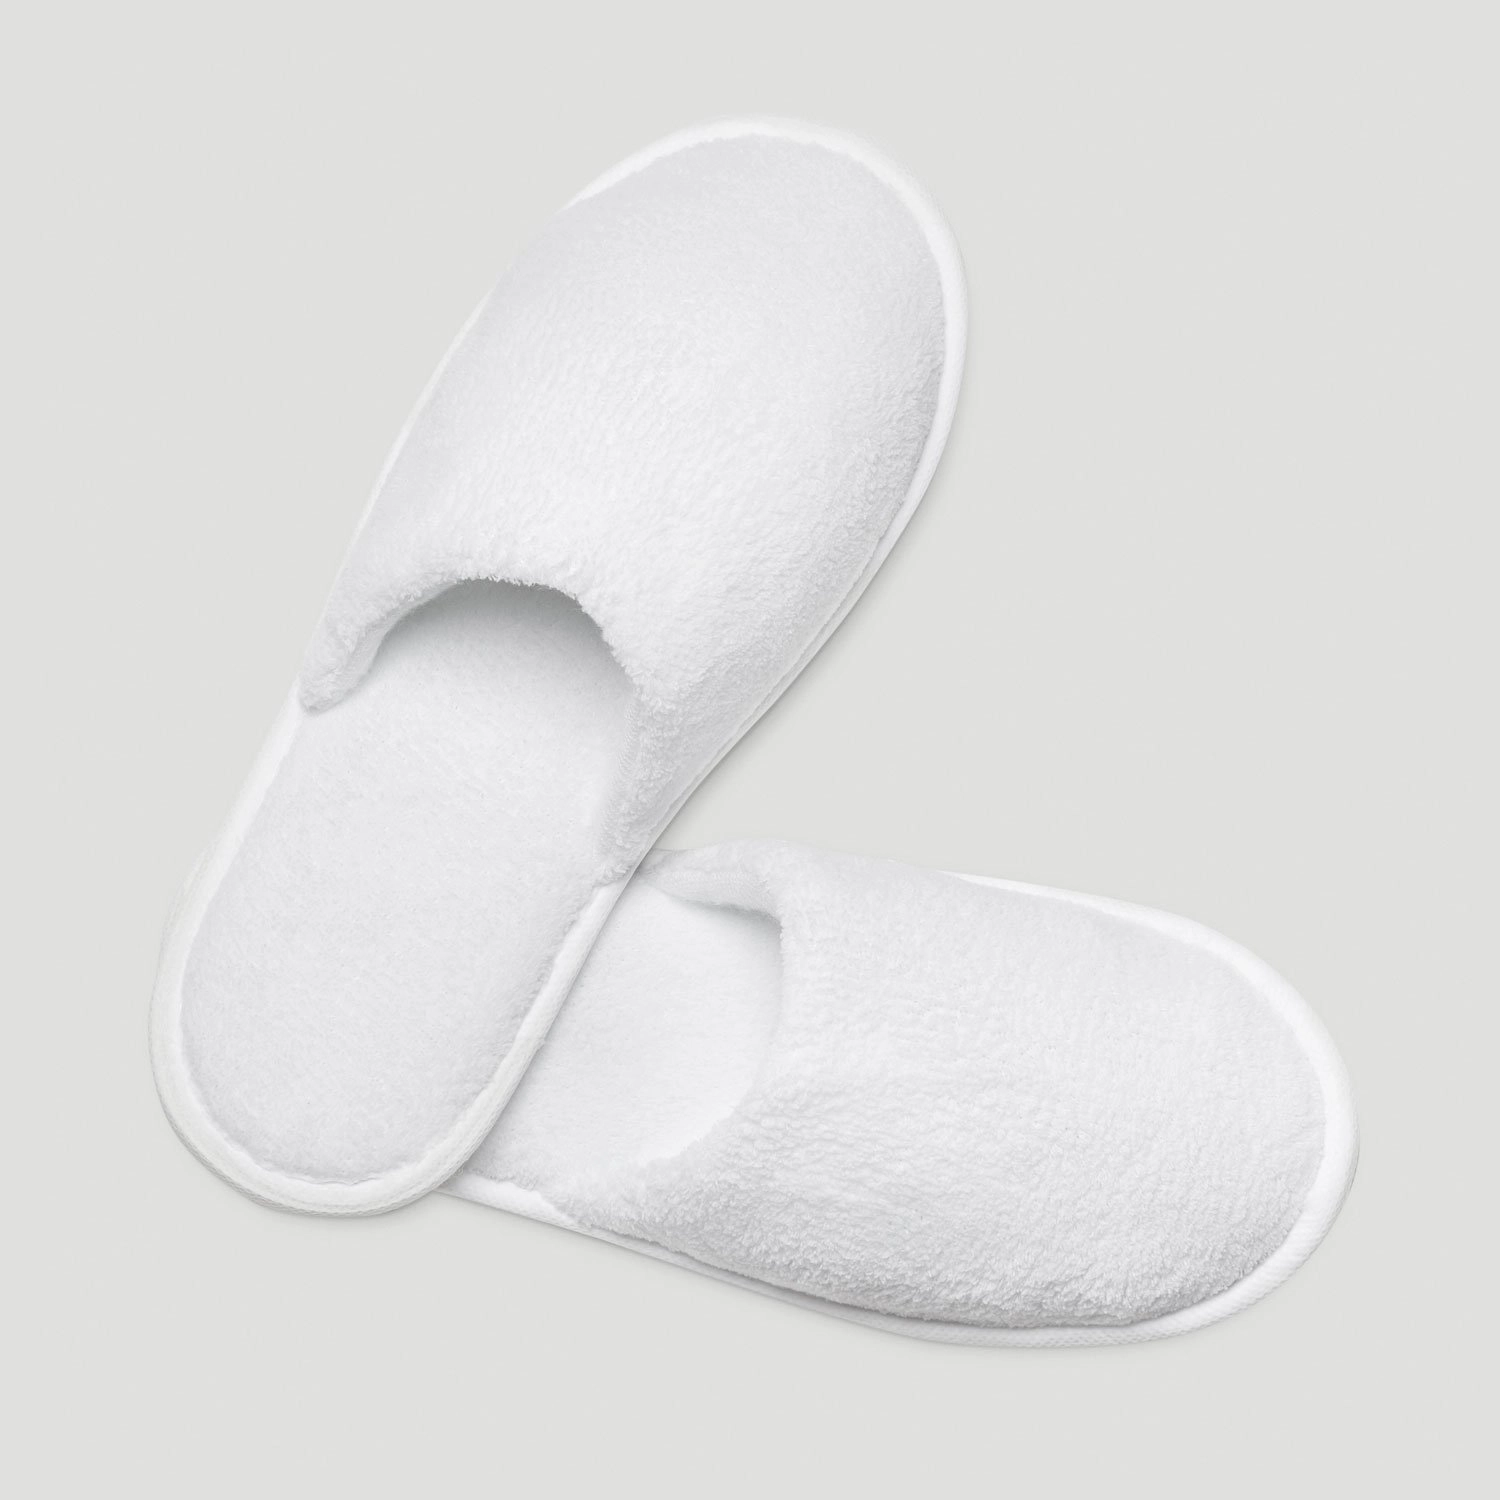 Alle skyde Frustration Men :: Slippers :: Terry Slippers :: White Closed Toe Adult Fleece Warm  Slippers - 6 pack - Wholesale bathrobes, Spa robes, Kids robes, Cotton  robes, Spa Slippers, Wholesale Towels